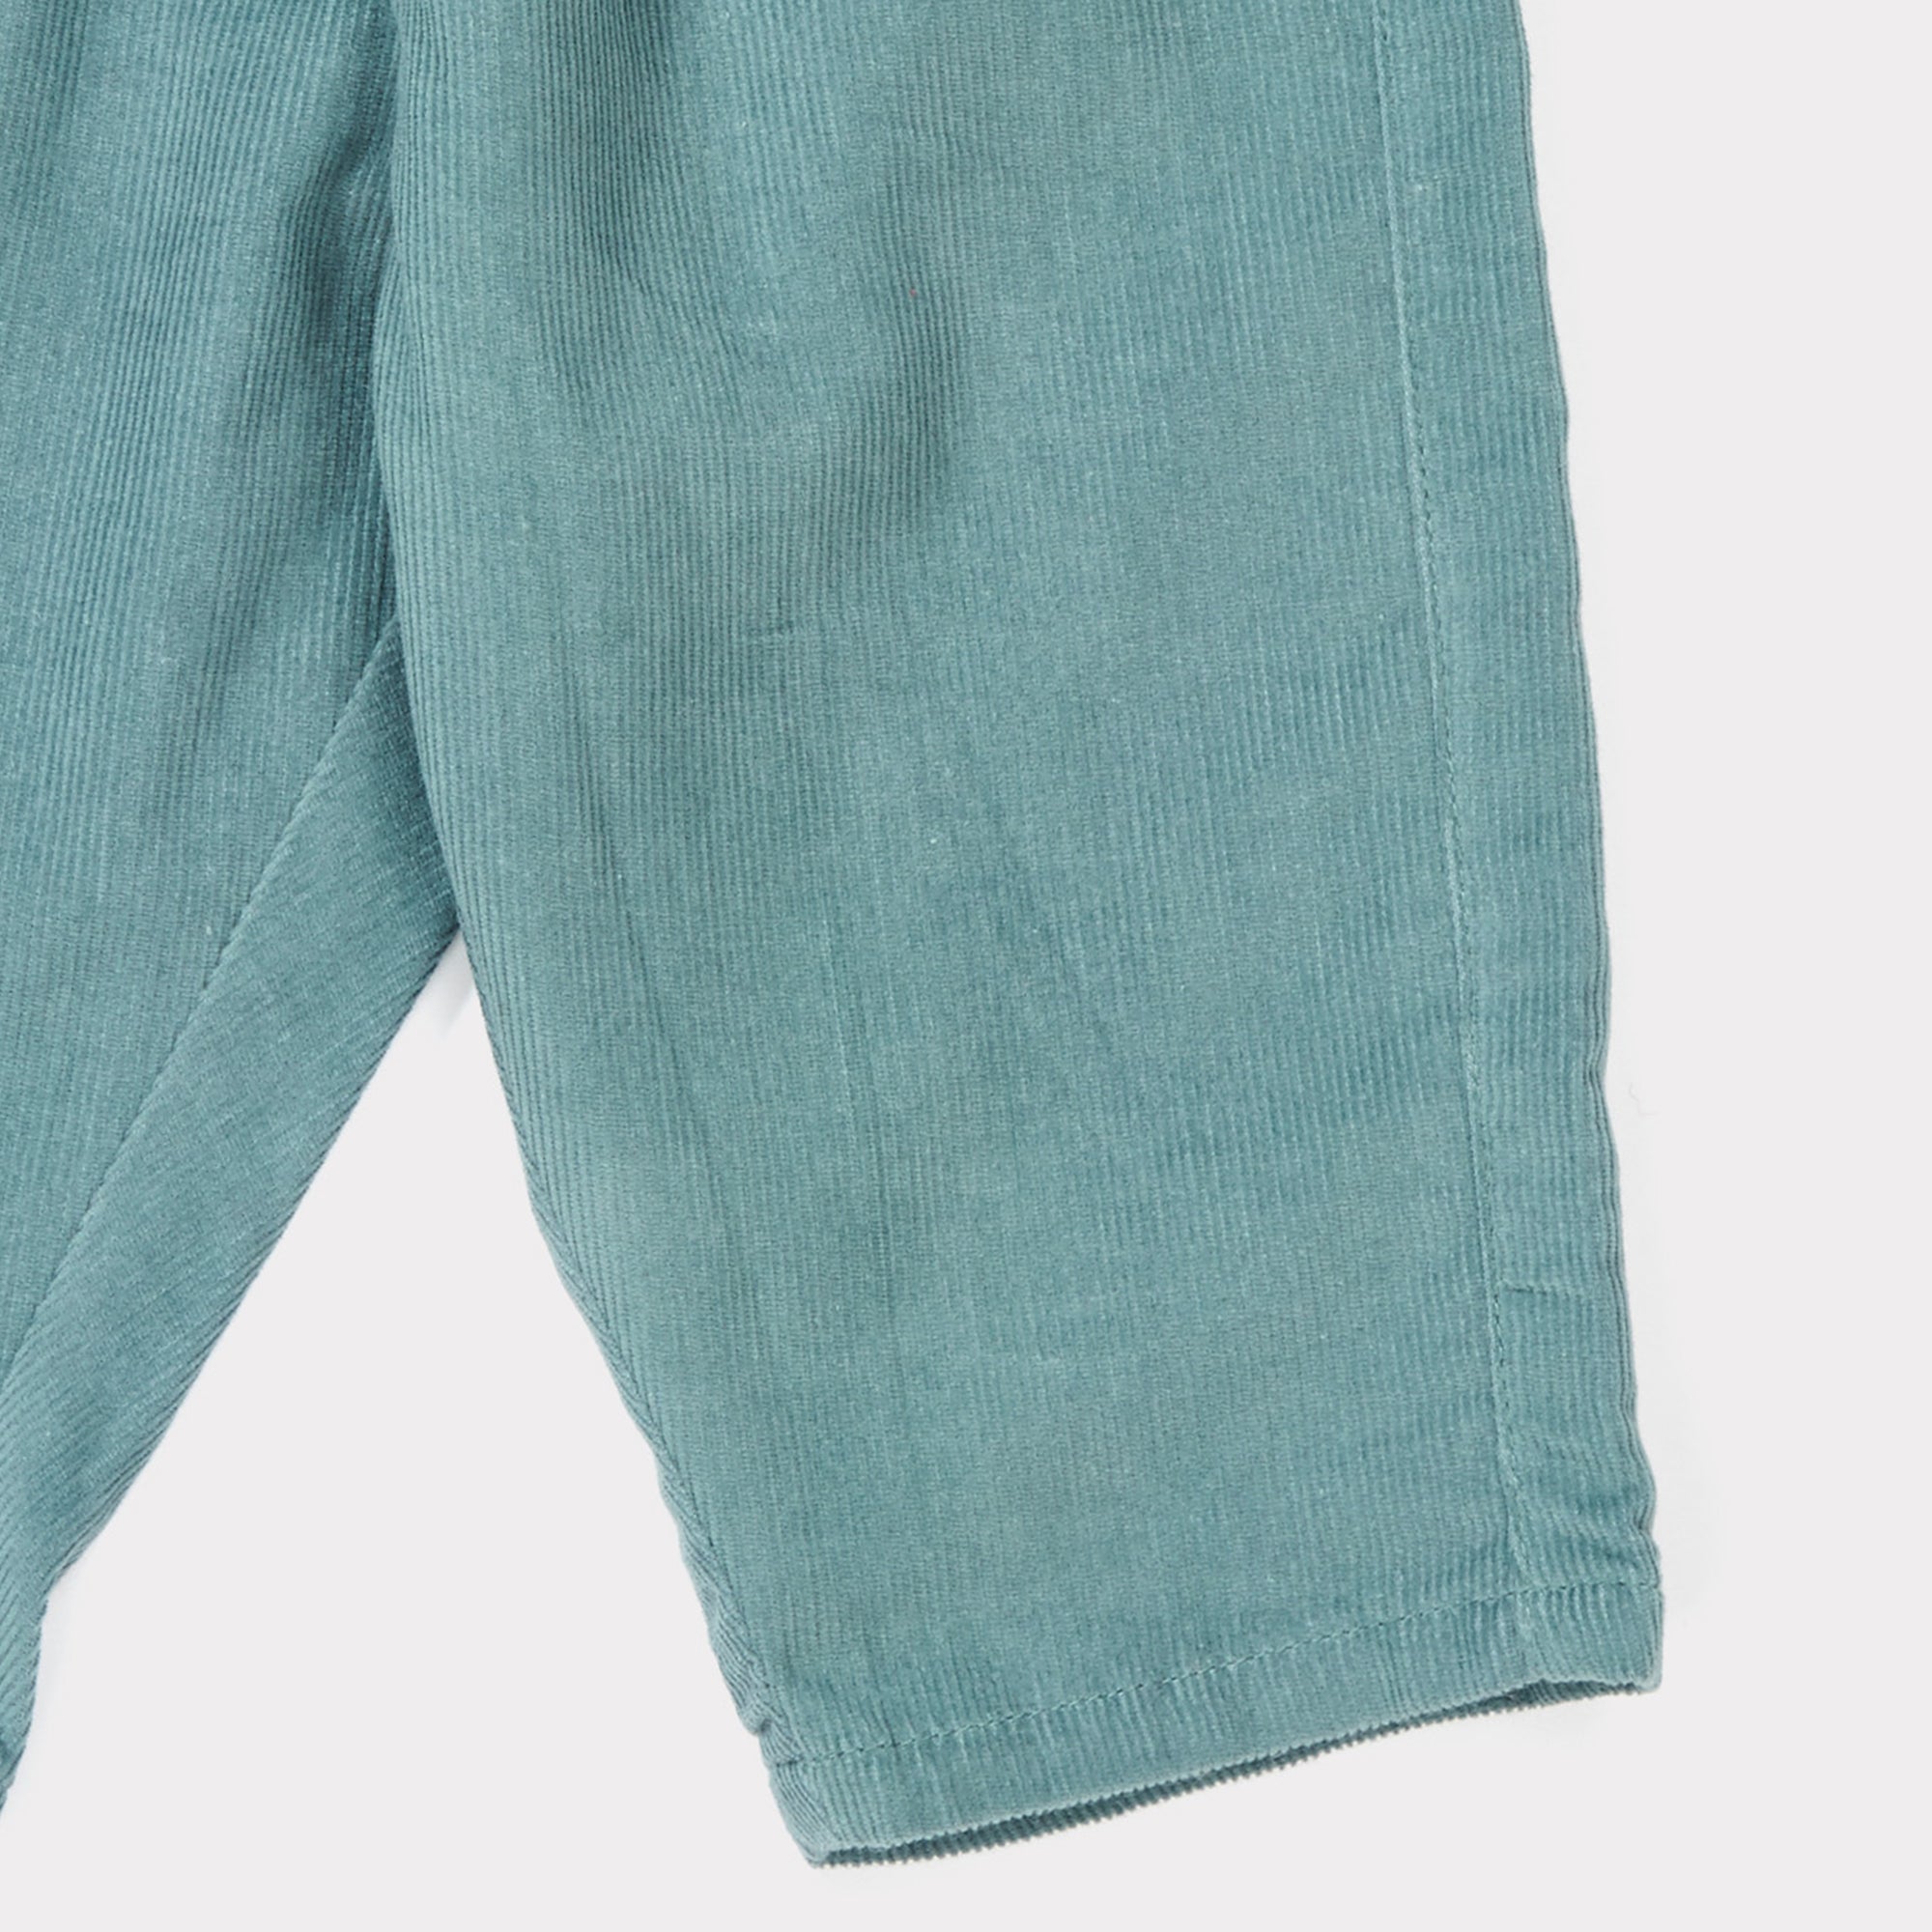 Baby Cameo Blue Cotton Woven Trousers